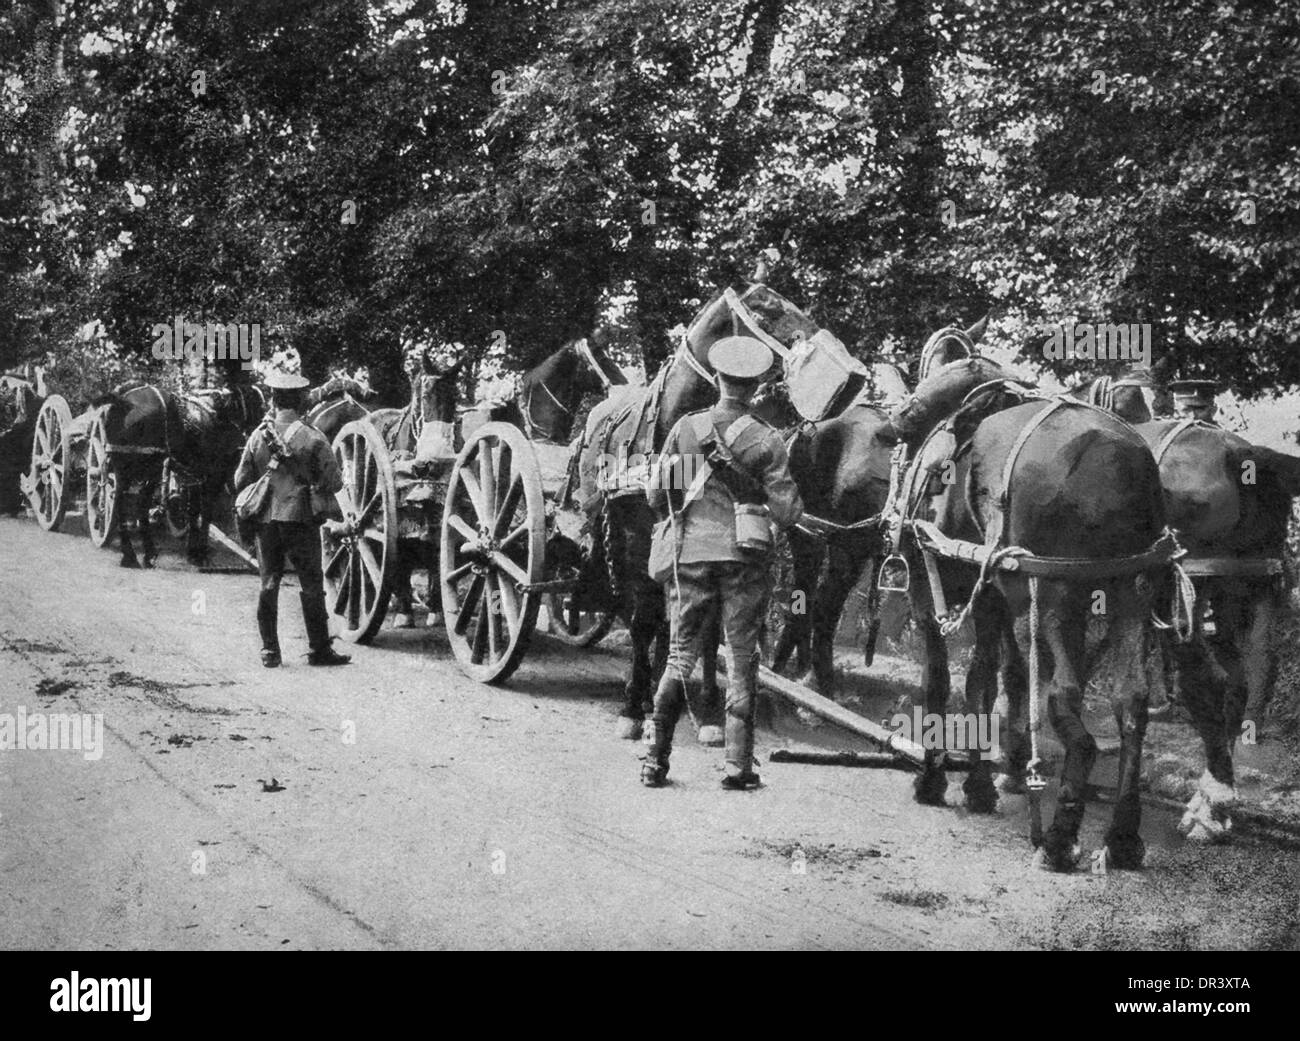 A British ammunition train in World War I stops along the road for the soldiers and animals to have lunch. Stock Photo